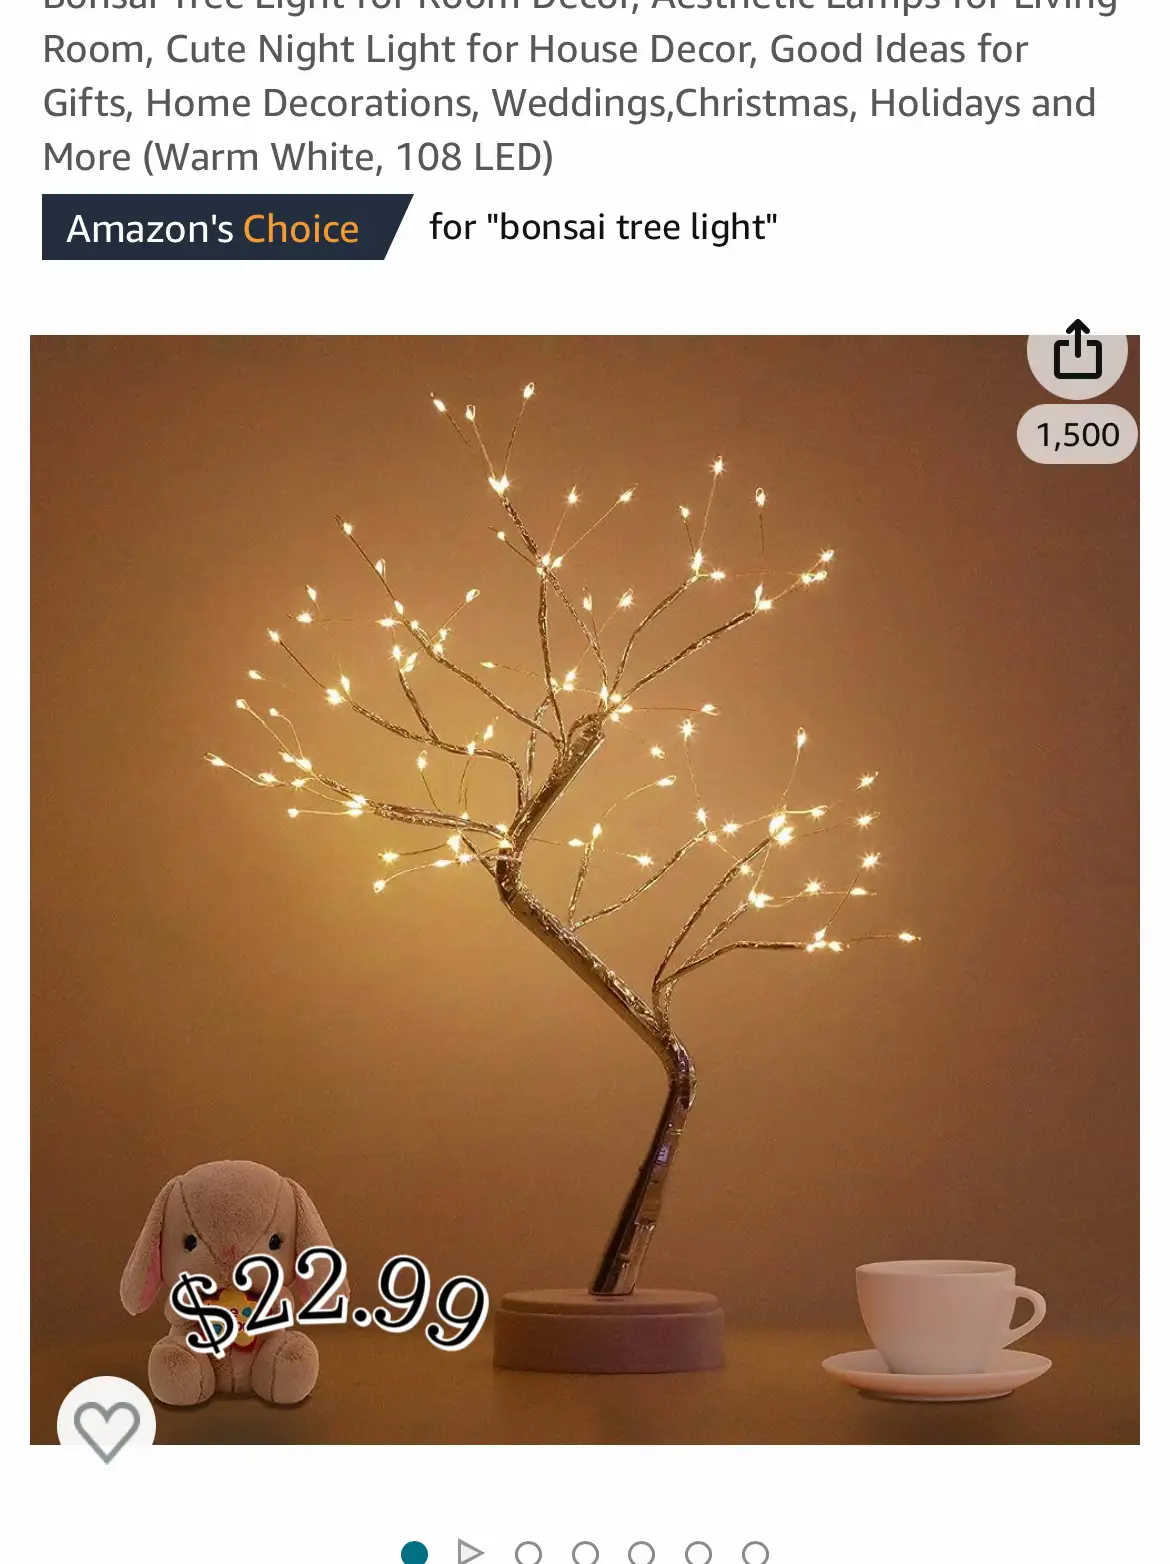 Bonsai Tree Light for Room Decor, Aesthetic Lamps for Living Room, Cute  Night Light for House Decor, Good Ideas for Gifts, Home Decorations,  Weddings,Christmas, Holidays and More (Warm White, 108 LED) 